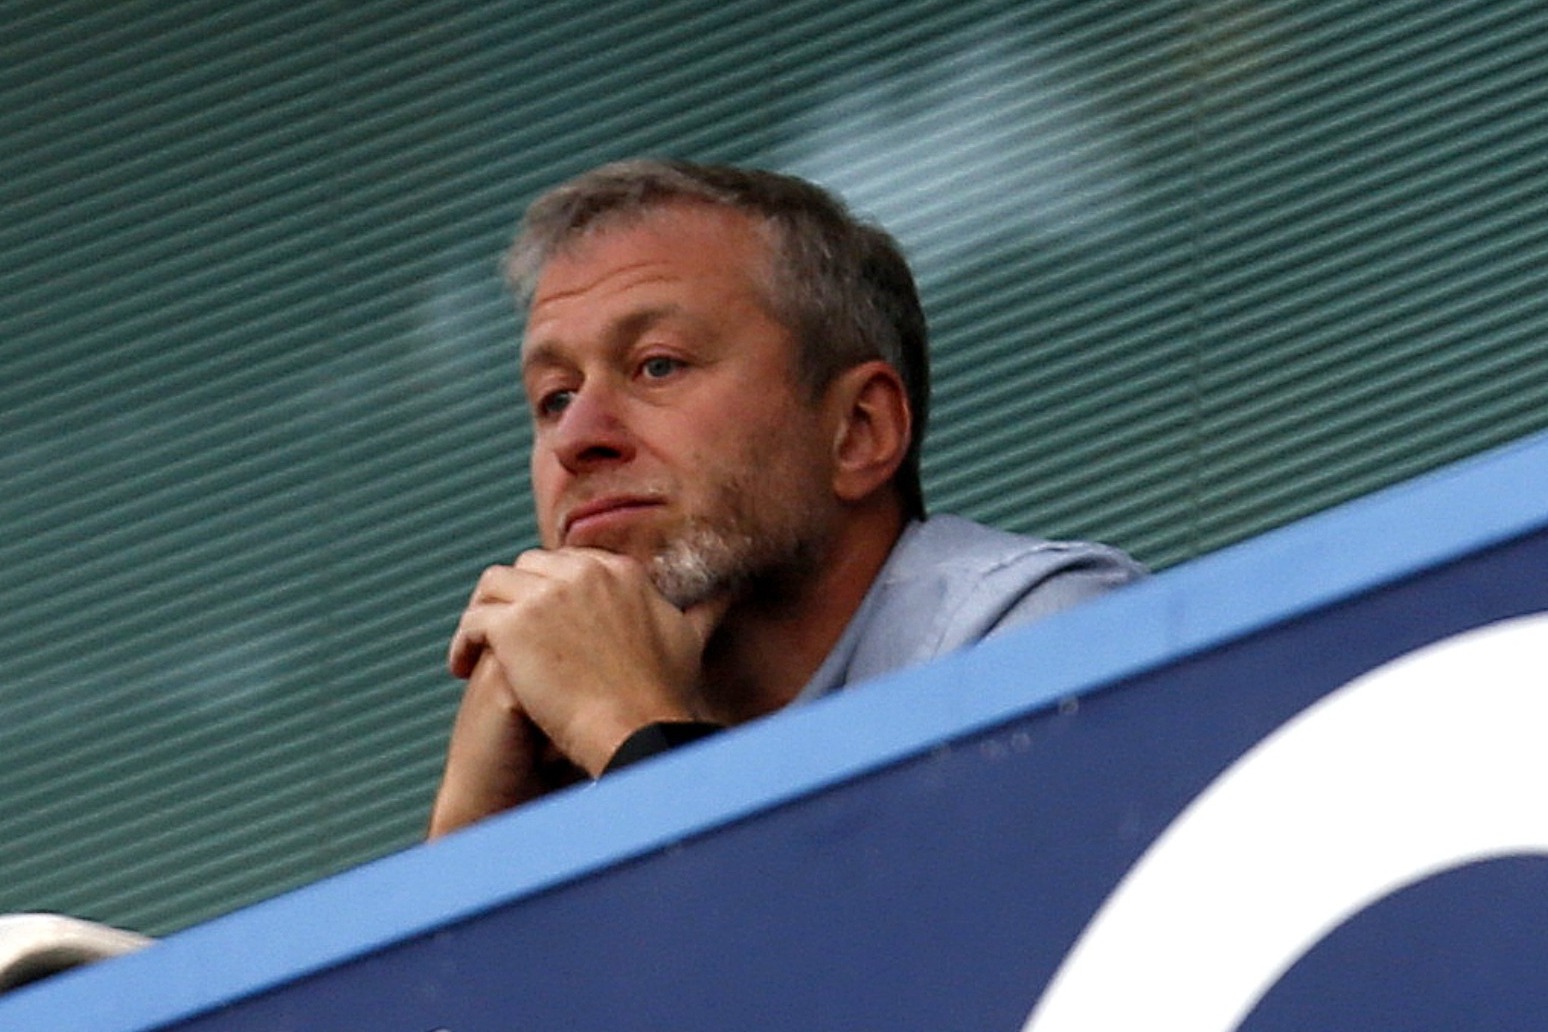 Chelsea cash crisis will not go away after Roman Abramovich hit with sanctions